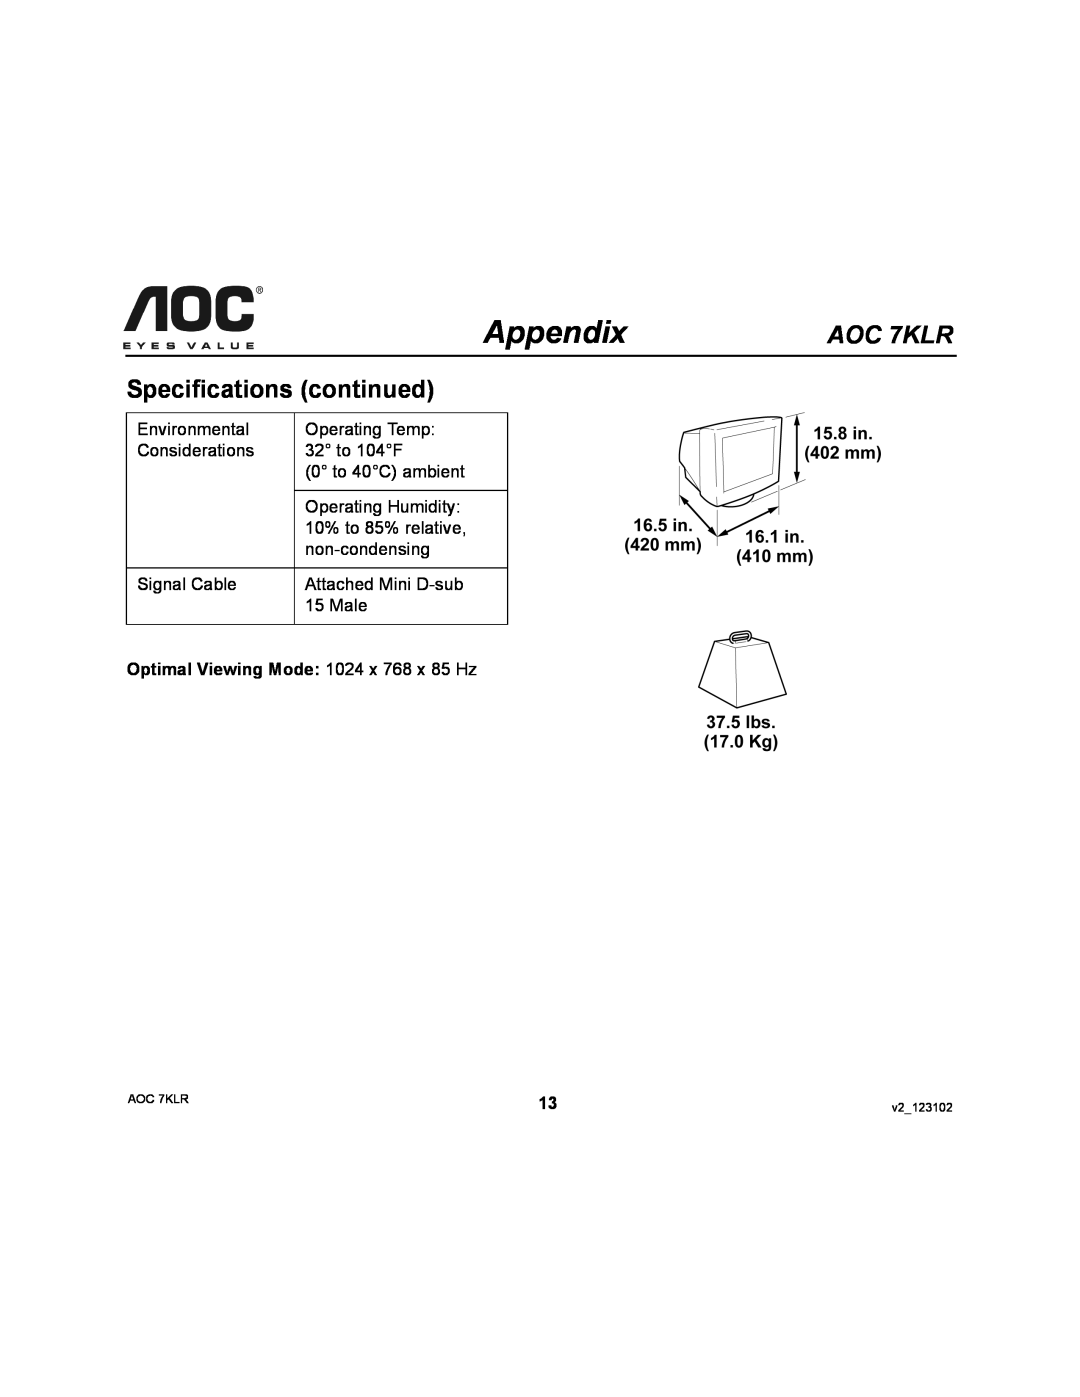 AOC user manual Specifications continued, Optimal Viewing Mode 1024 x 768 x 85 Hz, Appendix, AOC 7KLR 